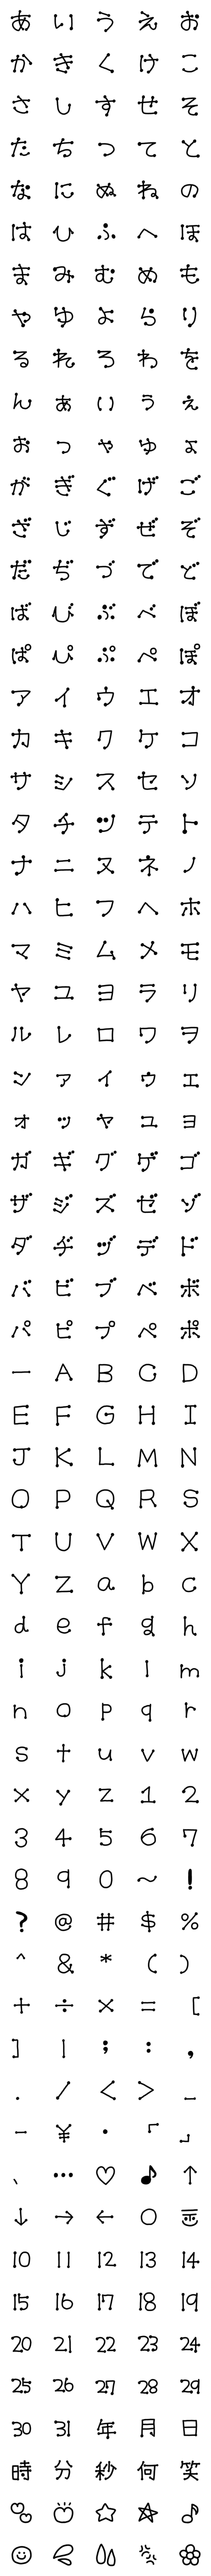 [LINE絵文字]くせ字フォント デコ絵文字の画像一覧